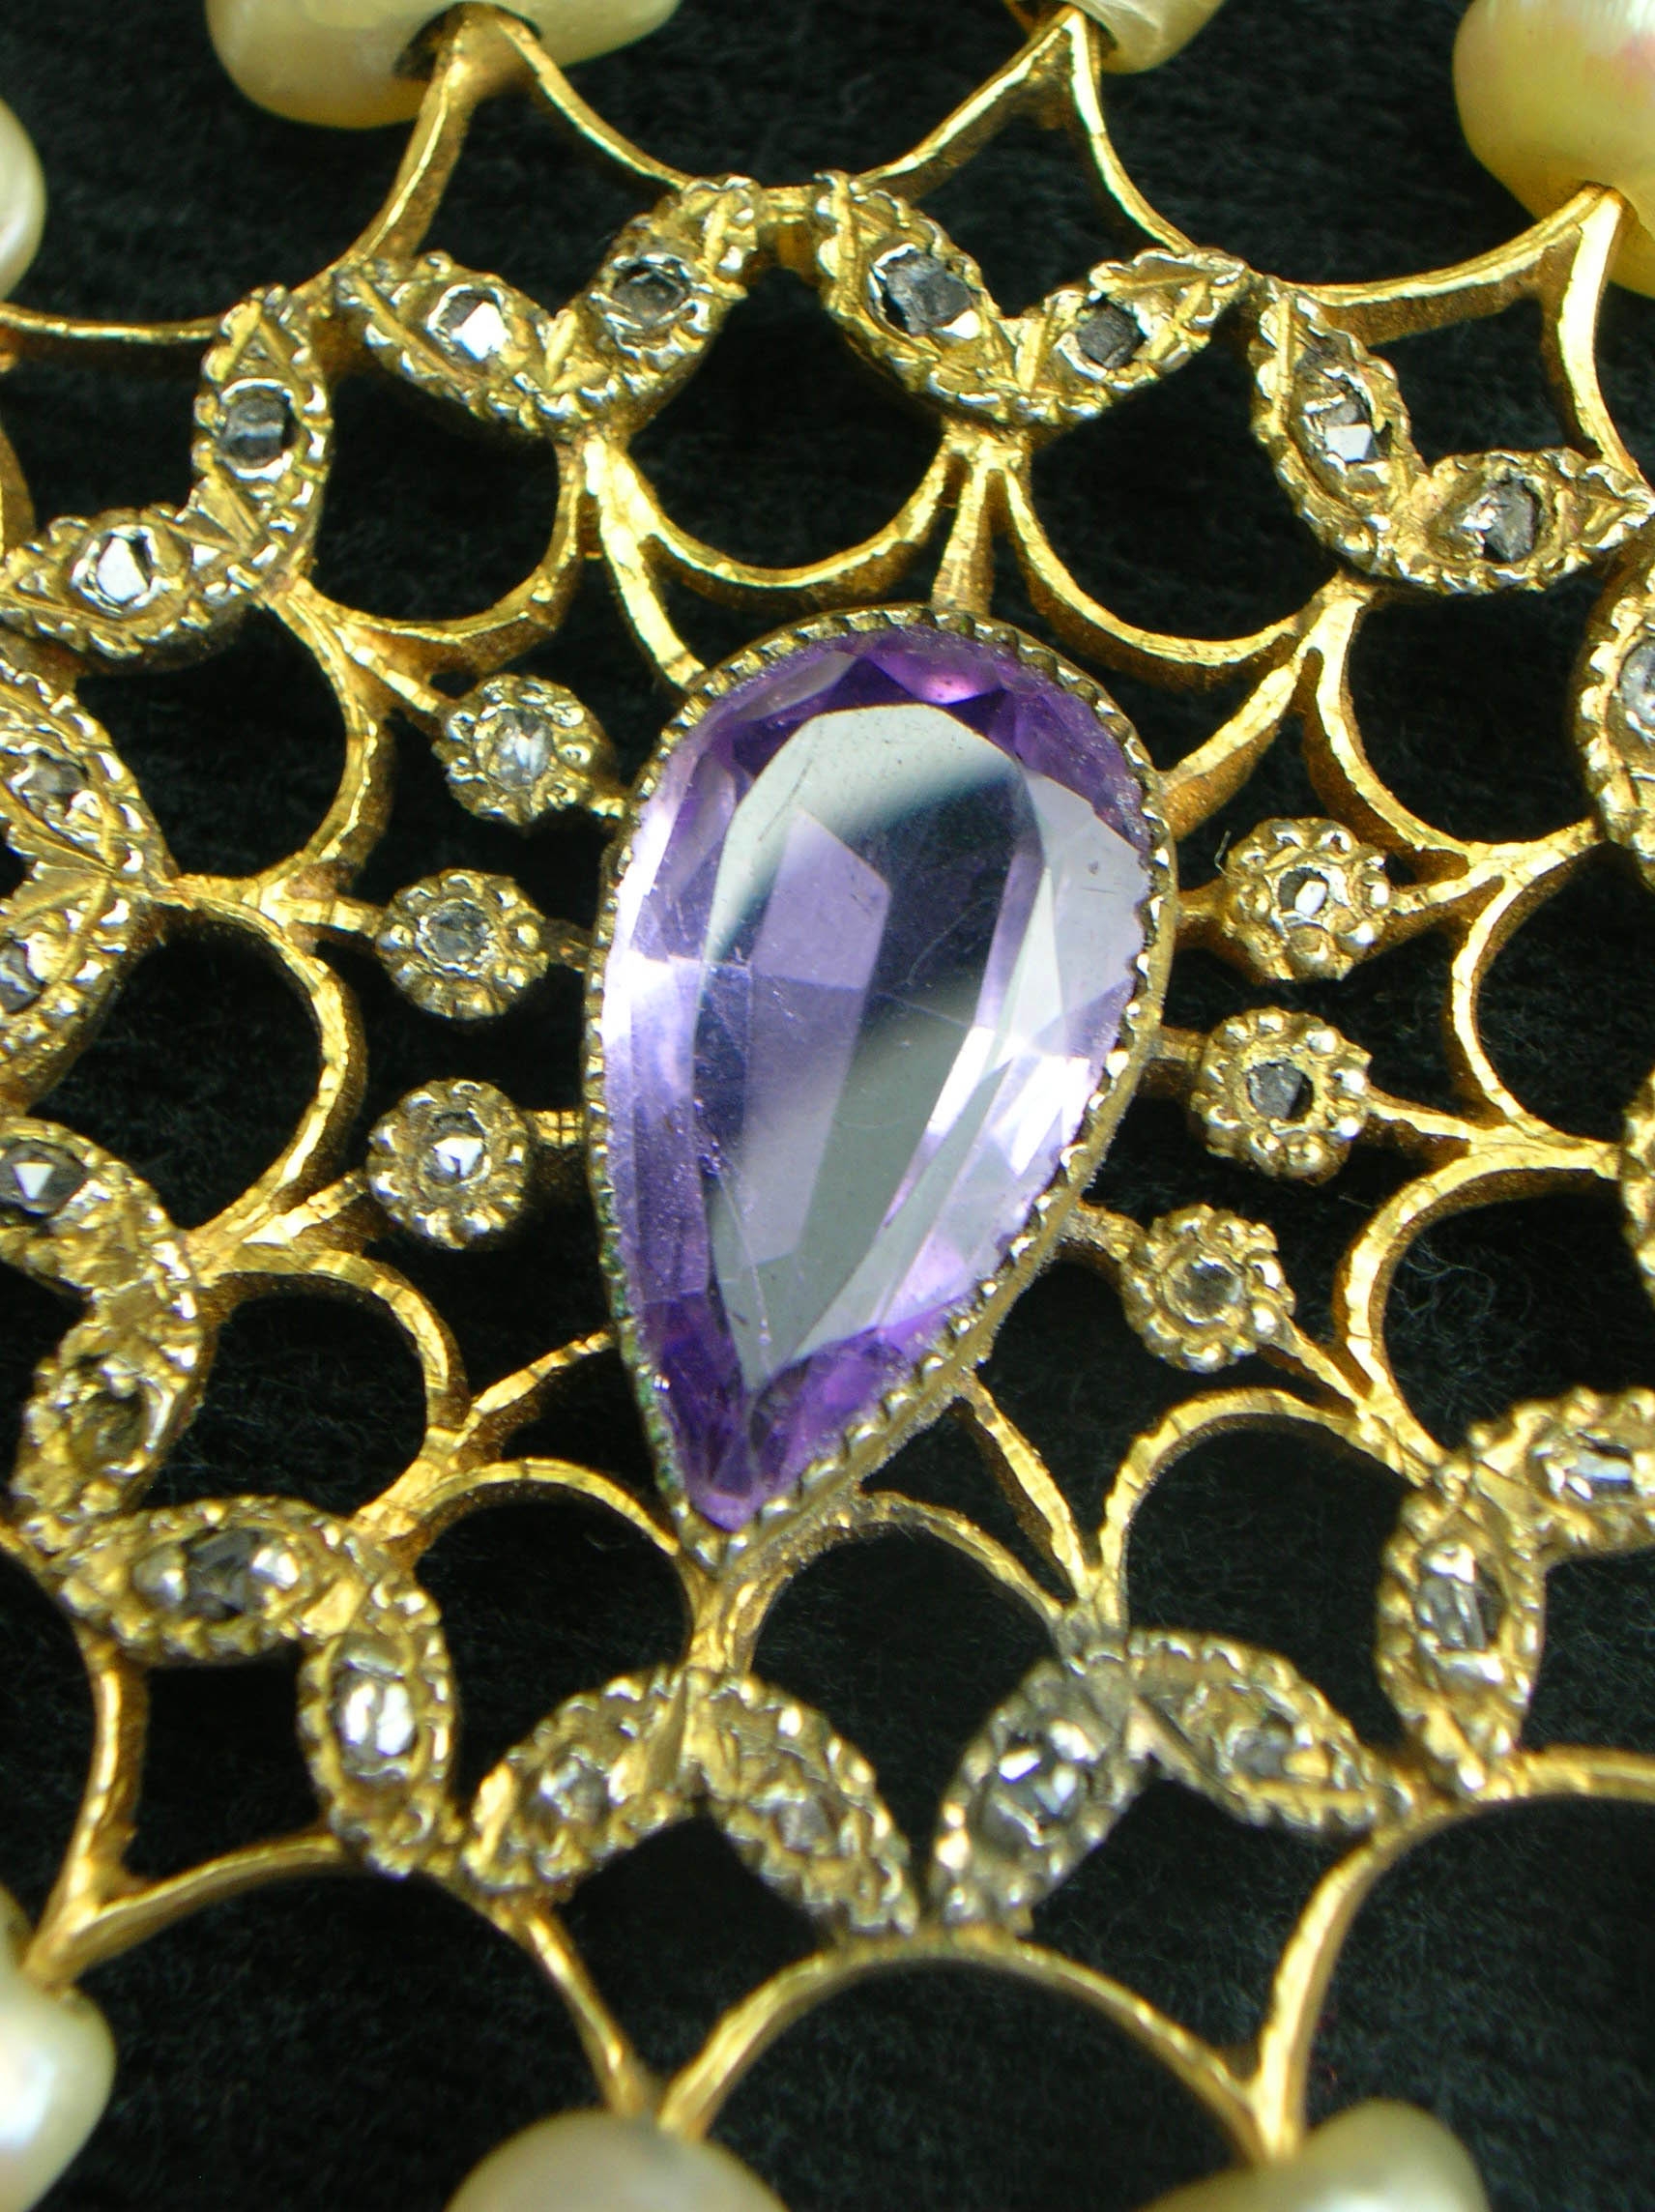 ROSARY: Showing hand faceted amethyst center / diamonds